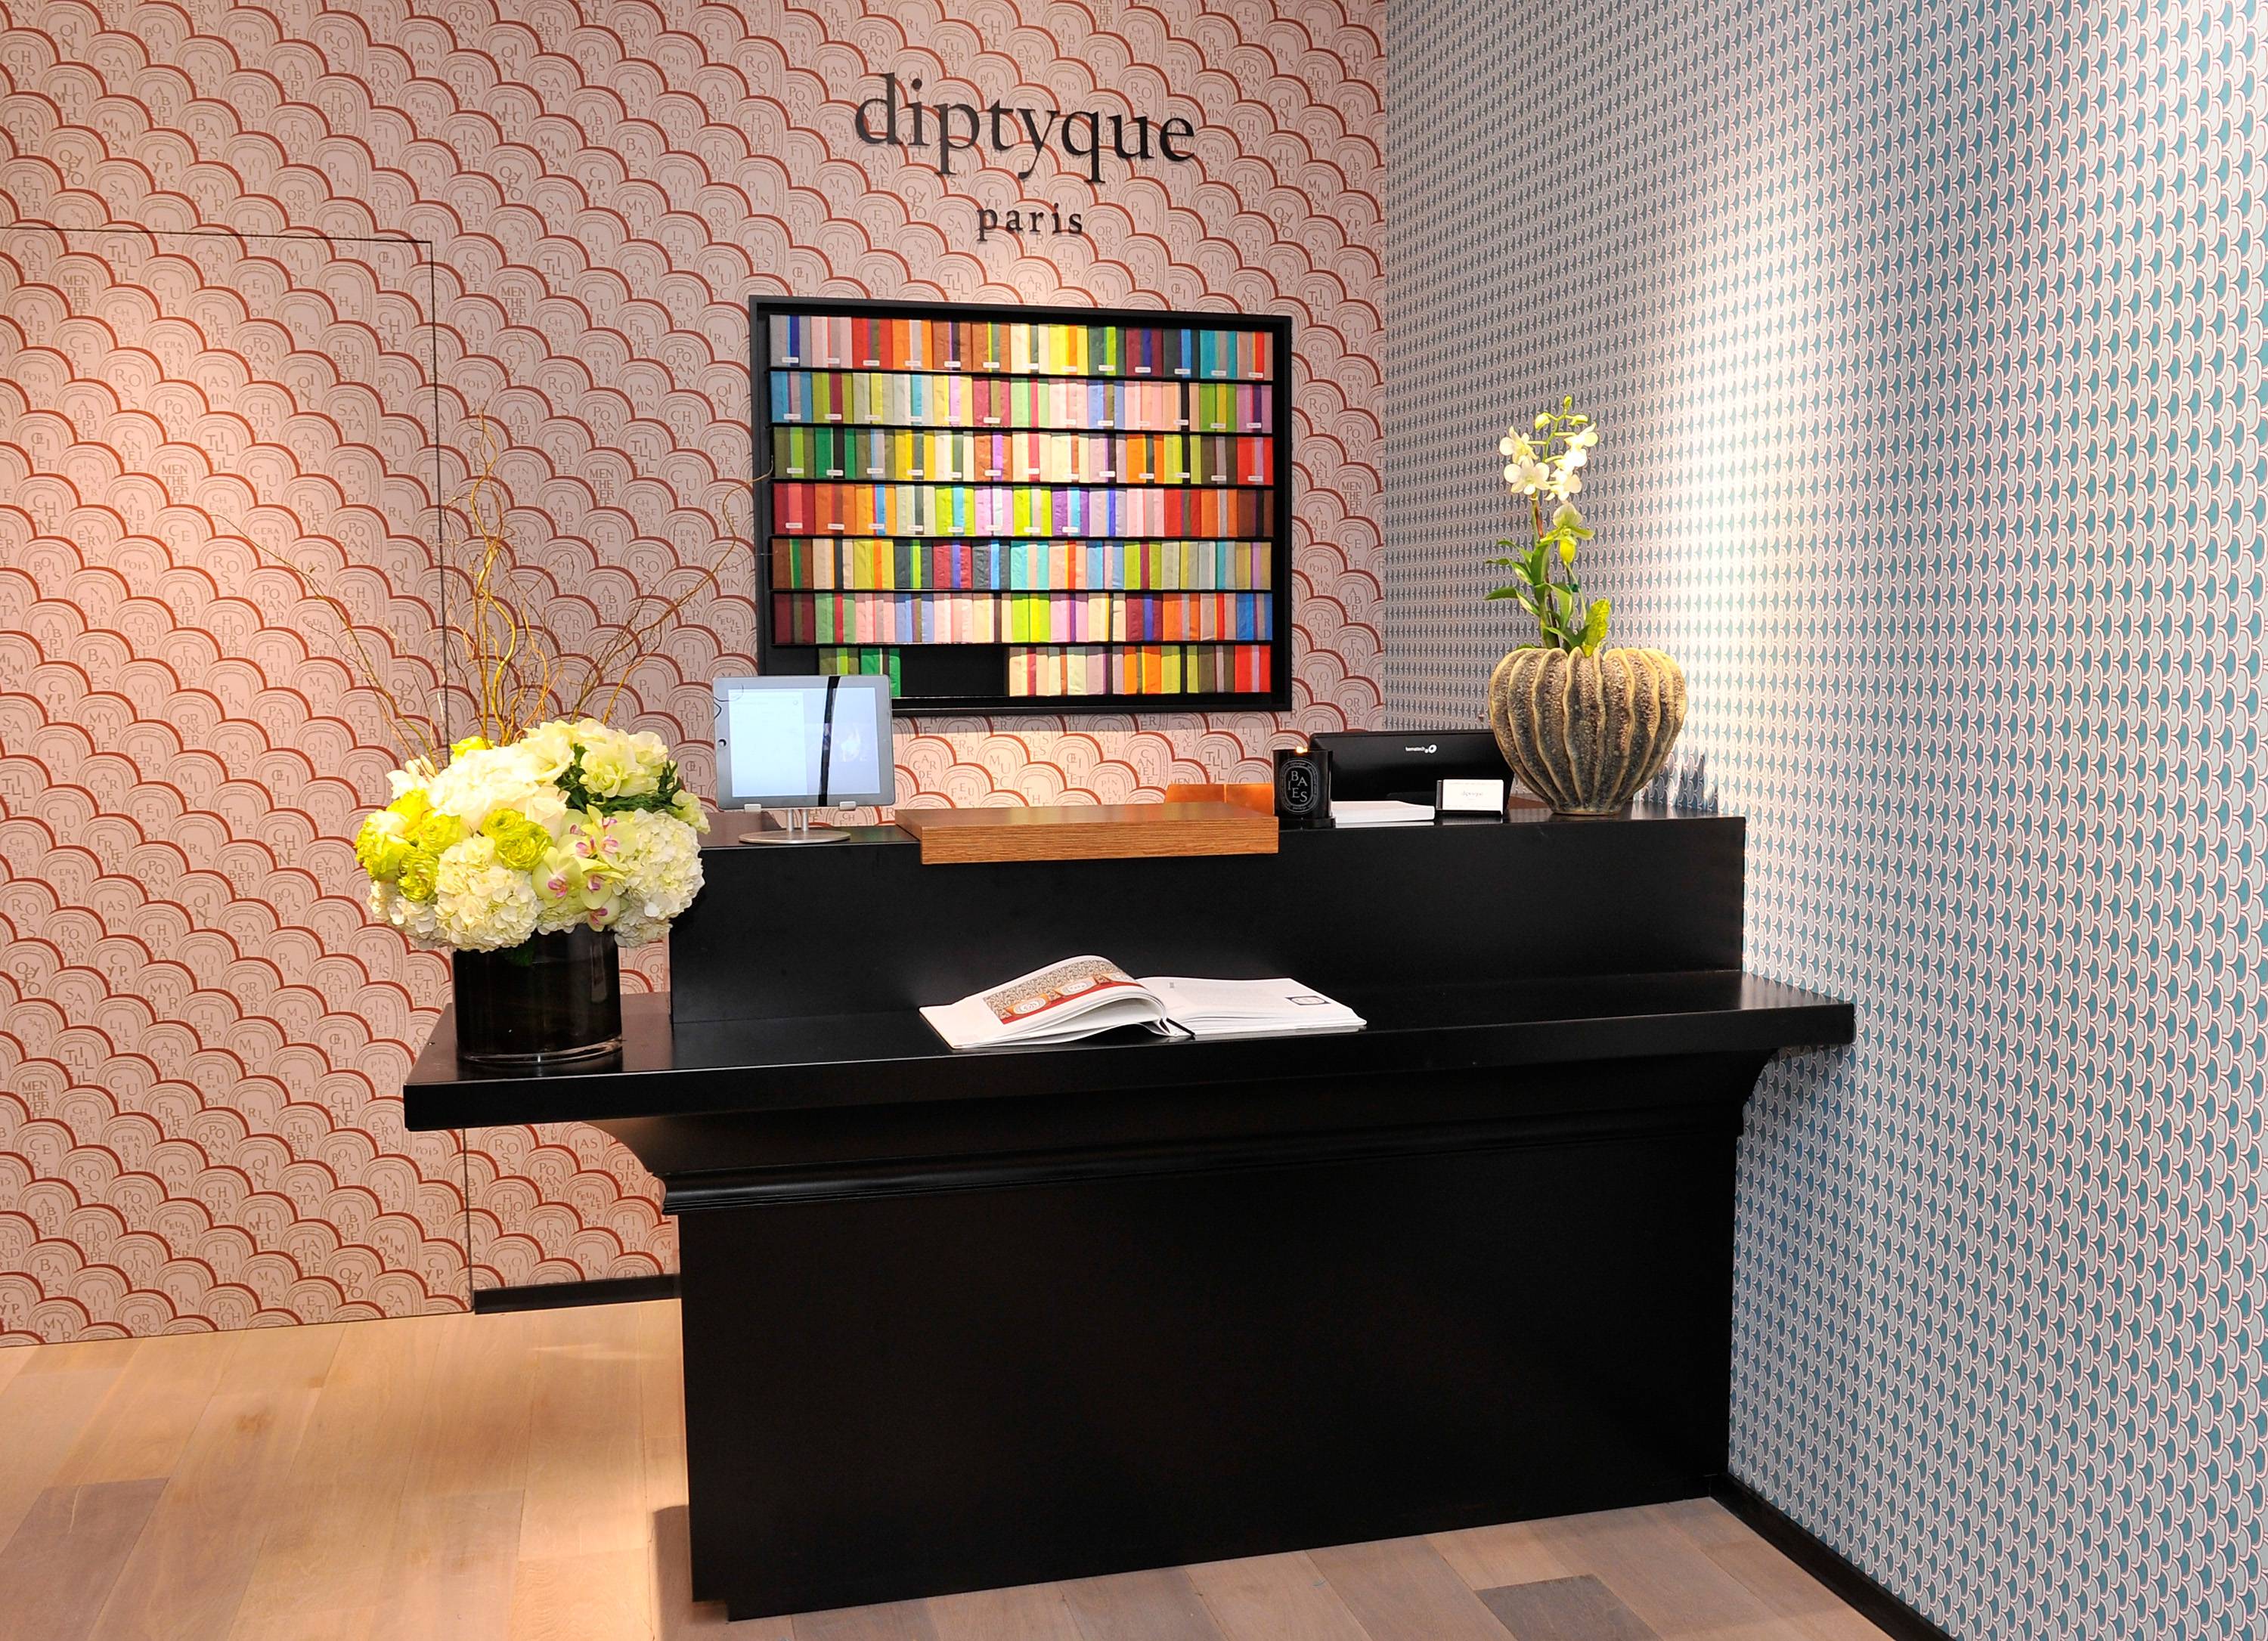 Diptyque Opens First Southern California Boutique In South Coast Plaza